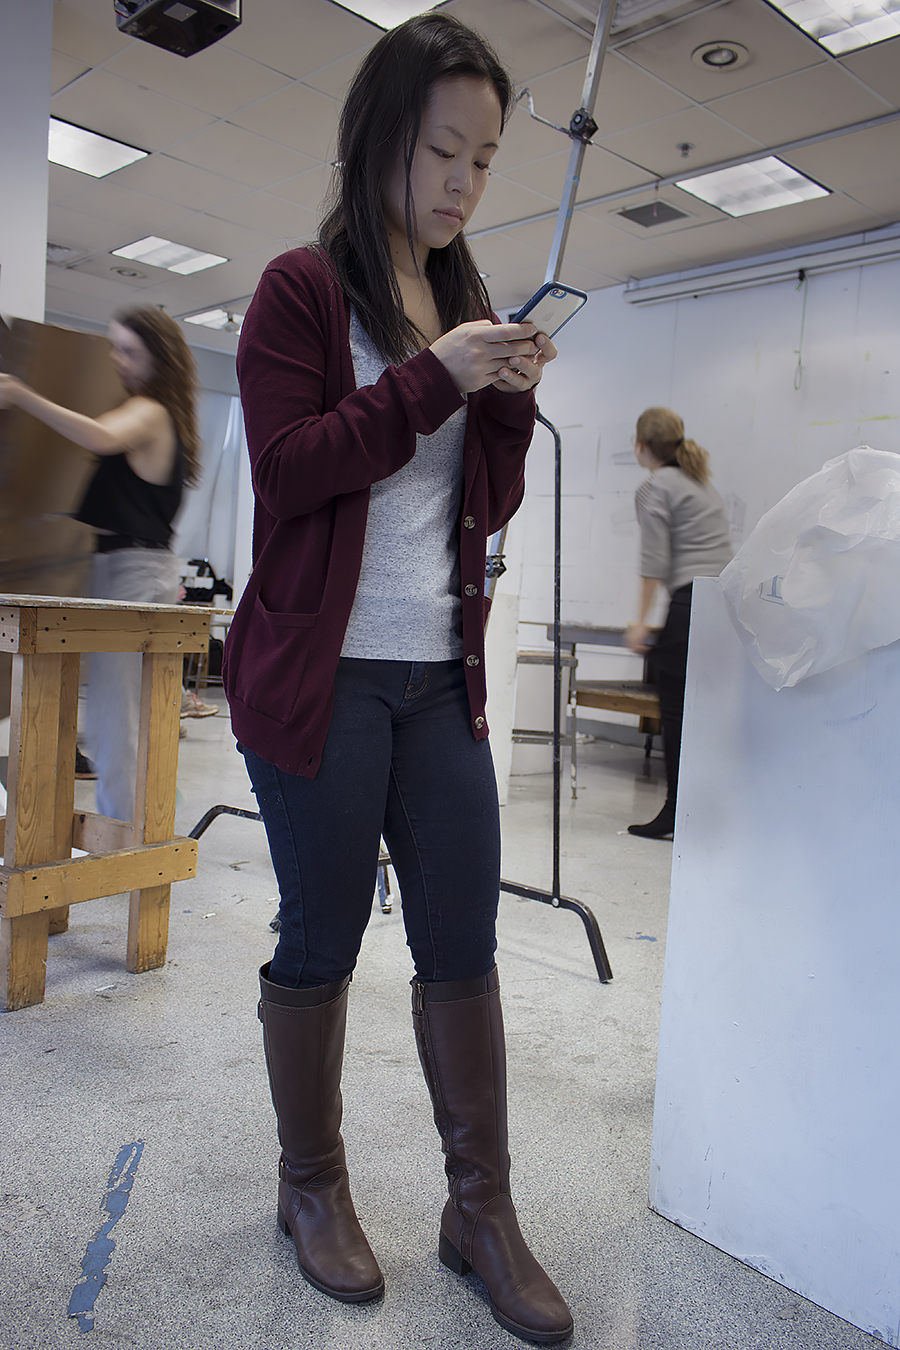 Tyler_Ling_photography_finearts_drawing_cellphones_absorbed_standing_fixed_socialmedia_texting_neuroscience_Cathy_Shao_Penn_sideshot_unaware